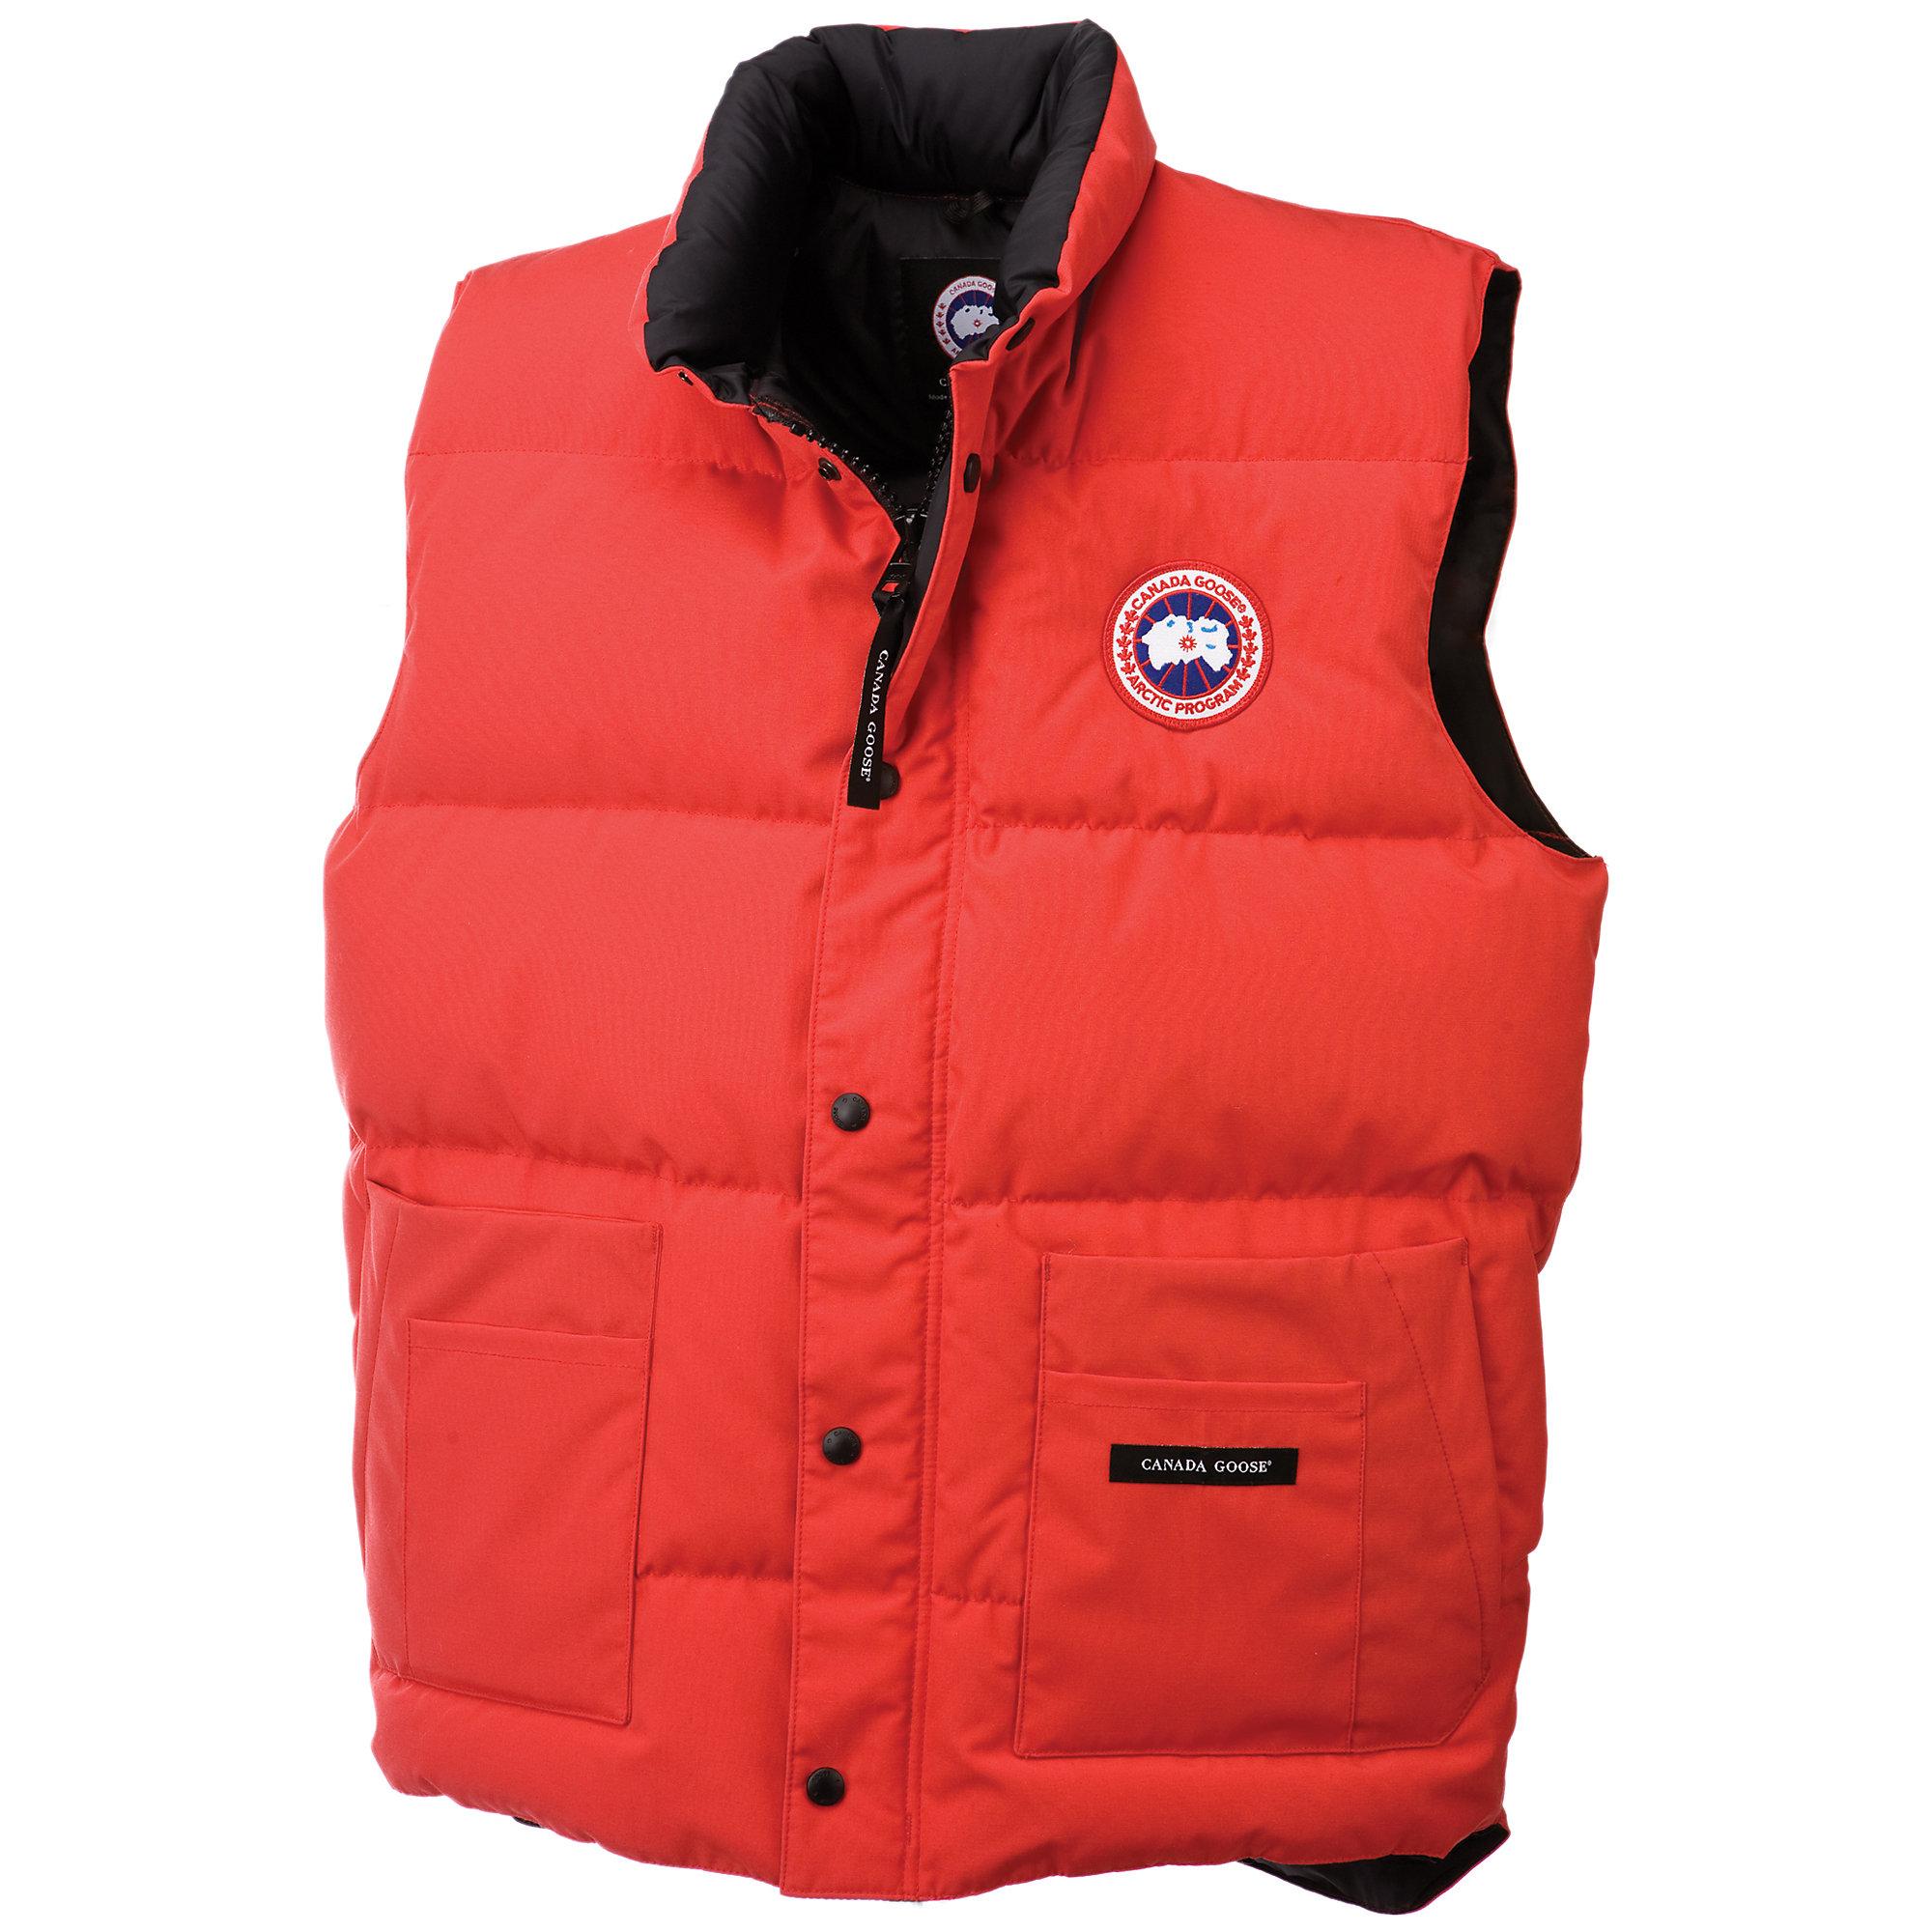 Canada Goose Freestyle Vest in Red for Men - Lyst